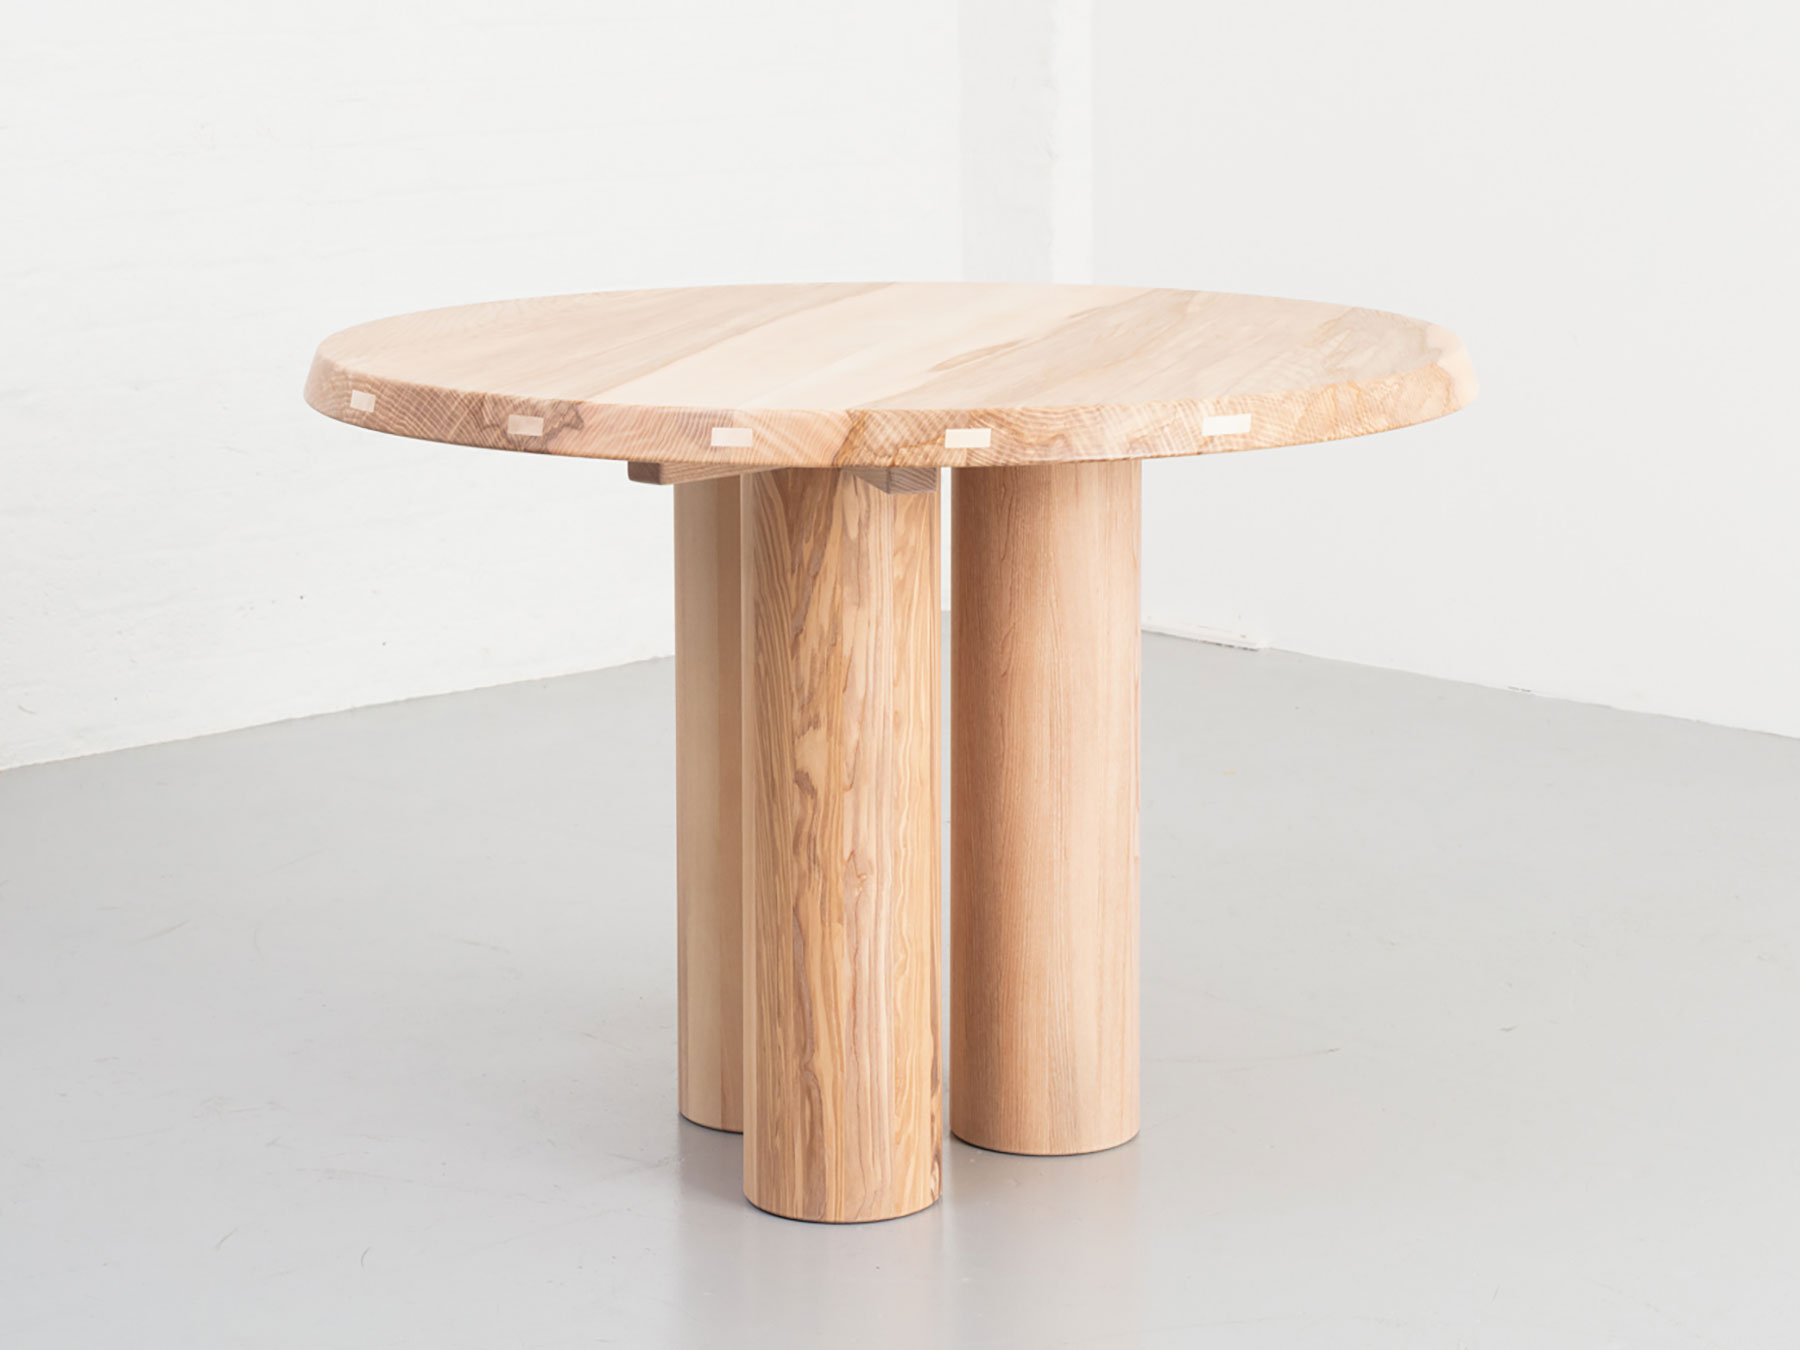 Small Pier round table made from either Scottish Elm or British Oak, 3 staved round legs supported by an all timber frame, table top constructed with loose tongue joinery